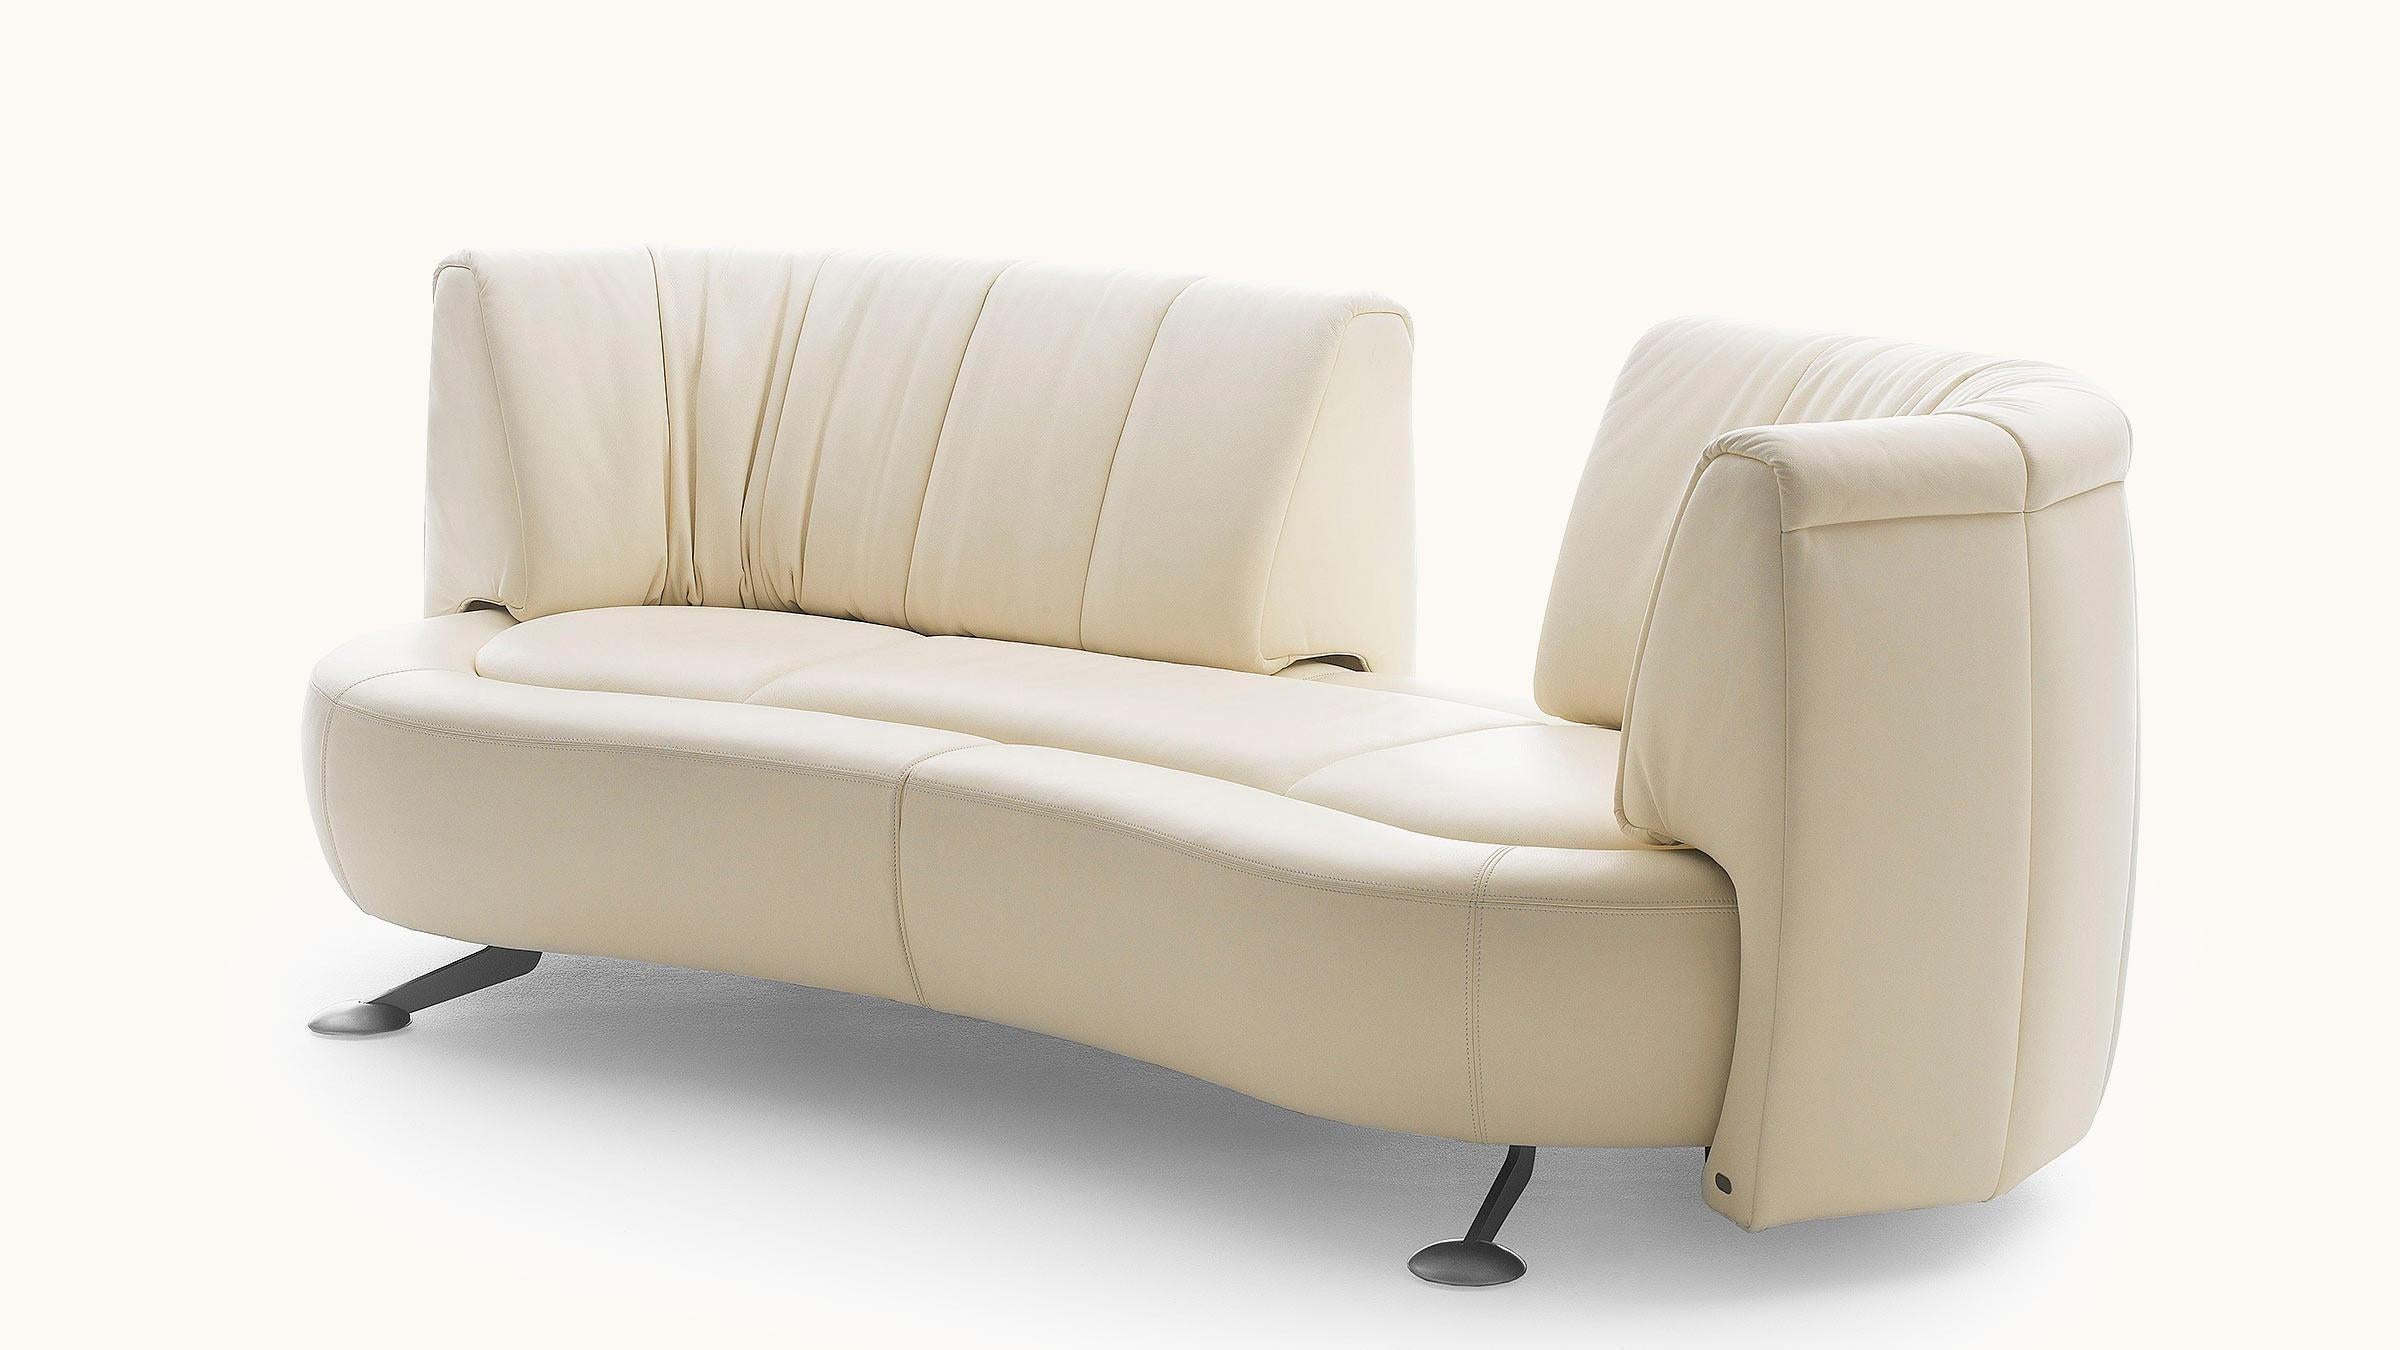 de sede ds-164 right sofa bed in off white upholstery by hugo de ruiter